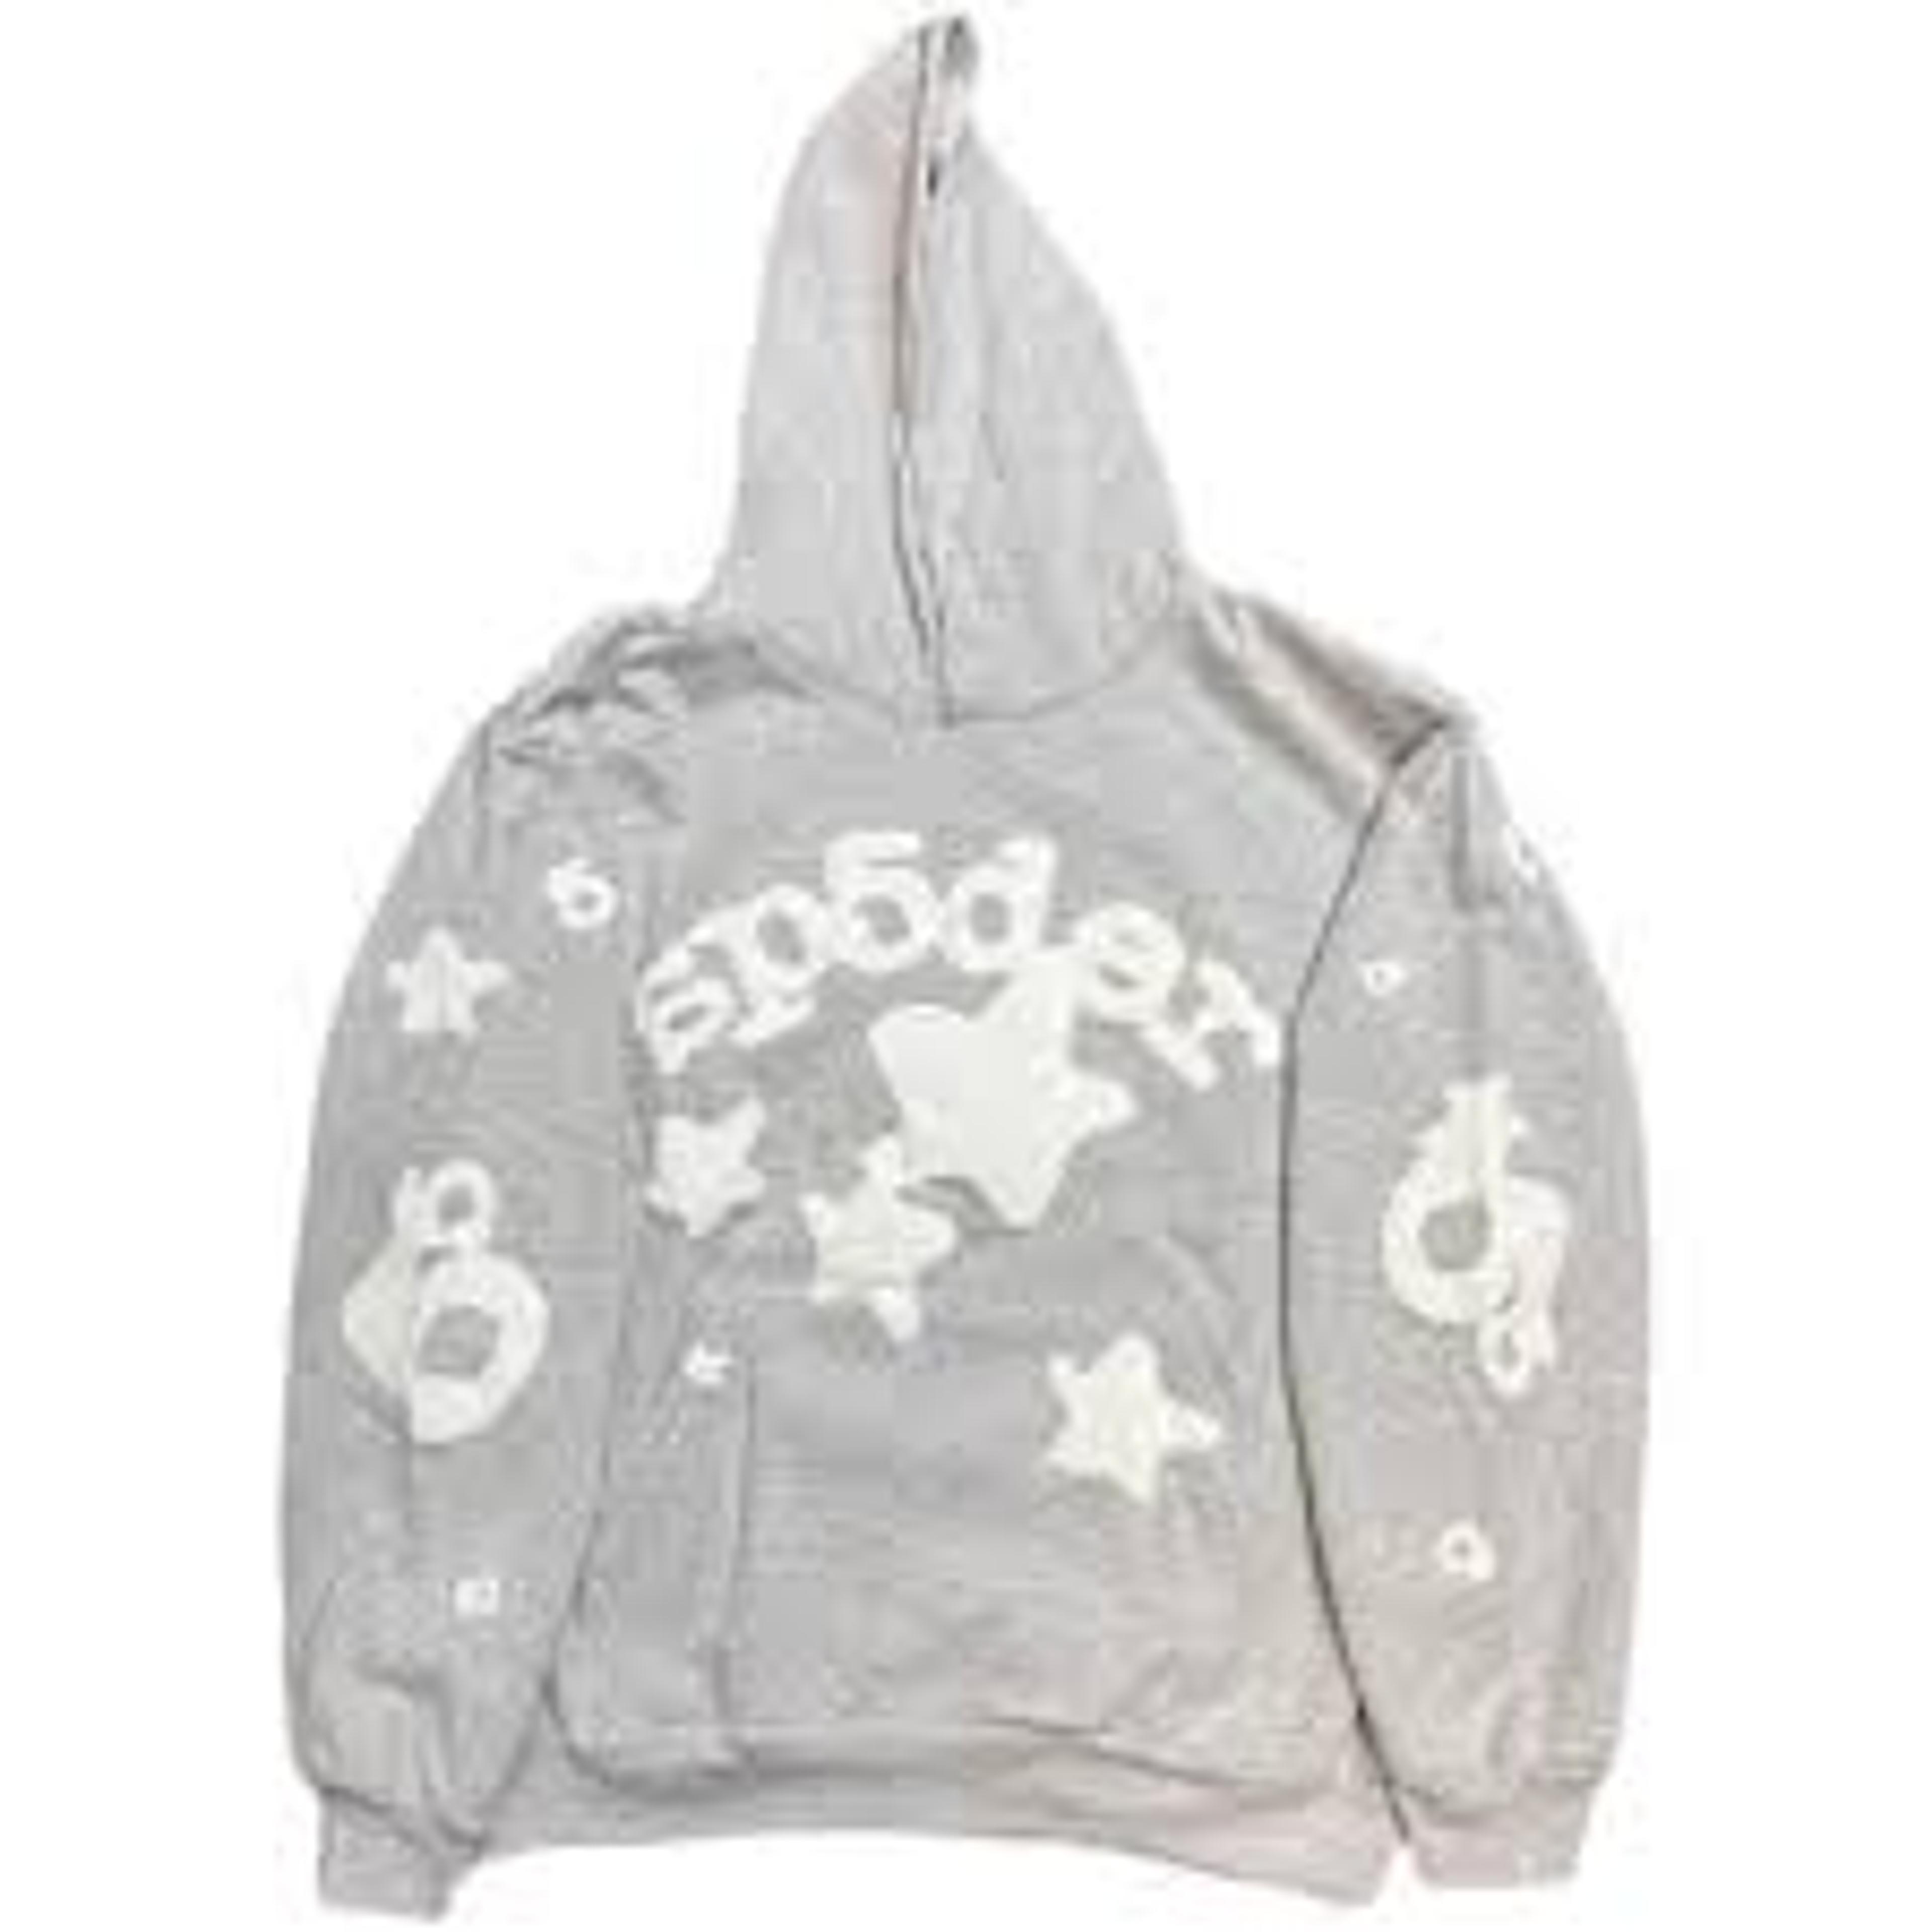 2023 Gray Spider grey zip up hoodie for Men and Women - Sp5der Web 555555 Design, Loose Fit, 1/1 White Pullover Pullovers